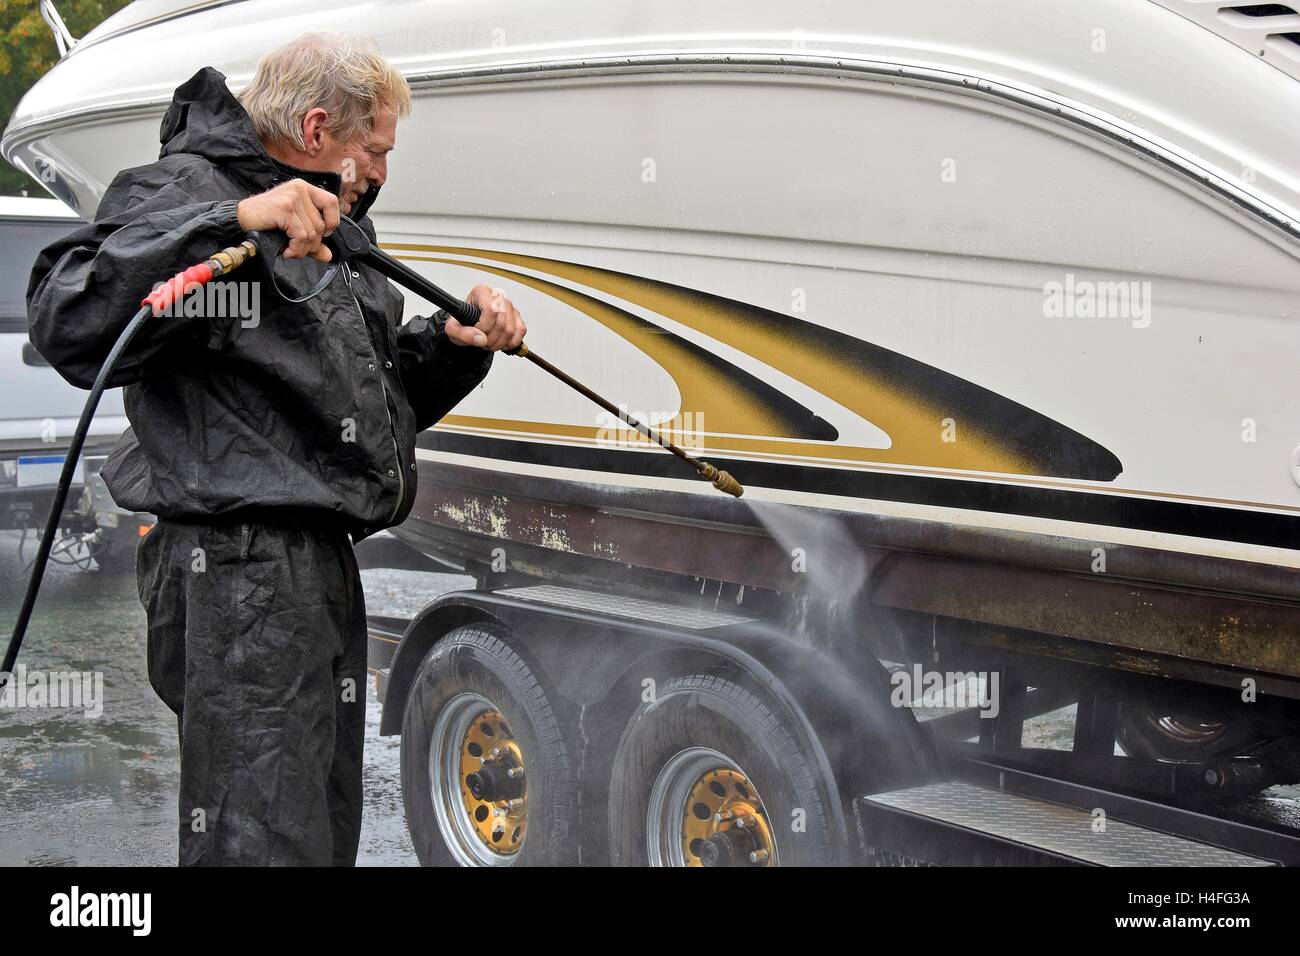 Caucasian man cleaning boat with pressure washer Stock Photo